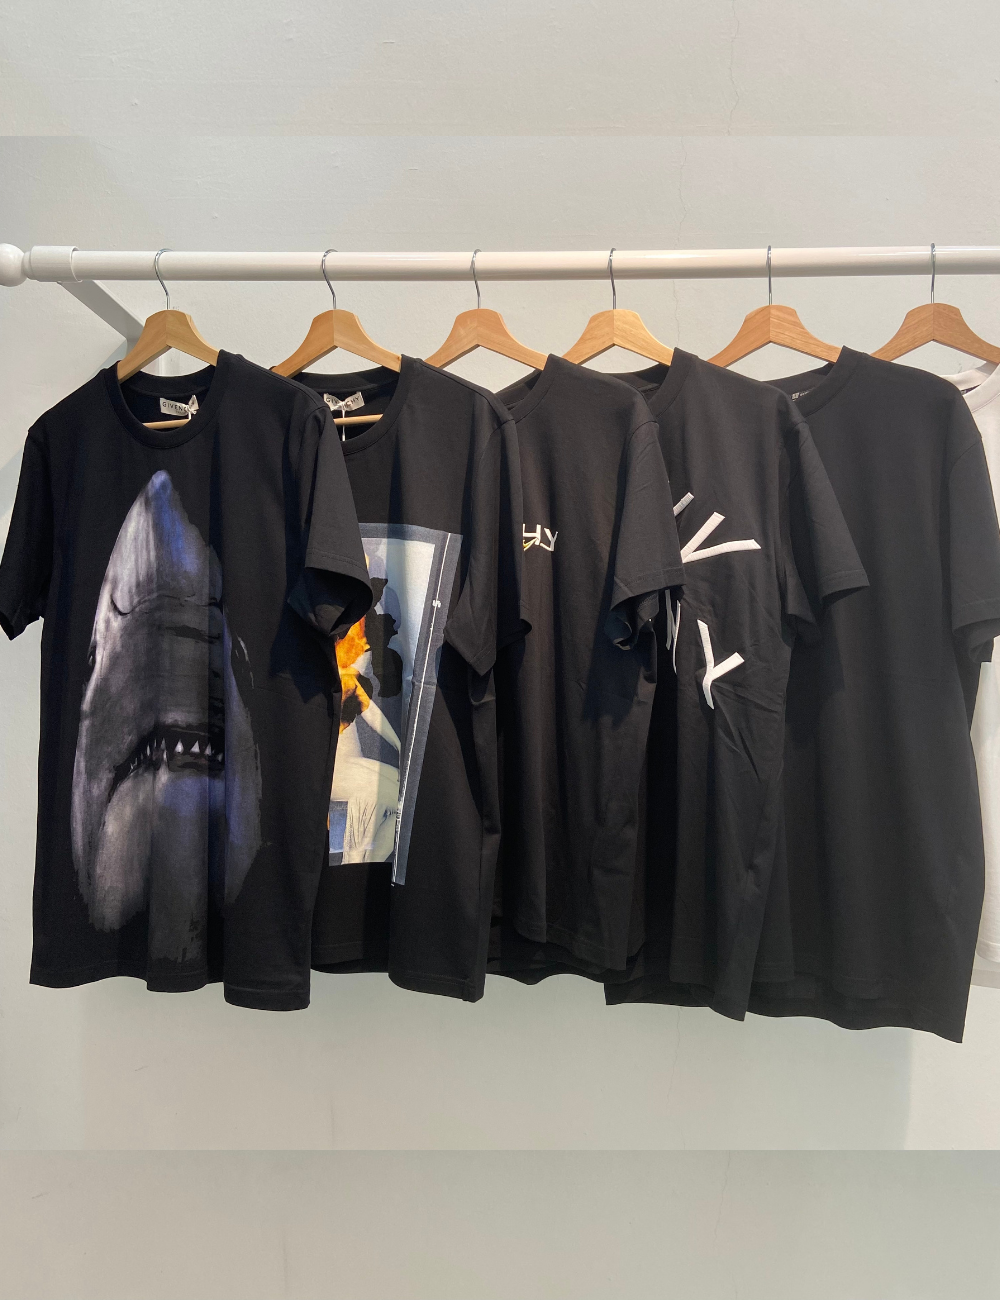 Givenchy Bambi Printed T-Shirt - Shop Streetwear, Sneakers, Slippers and Gifts online | Malaysia - The Factory KL